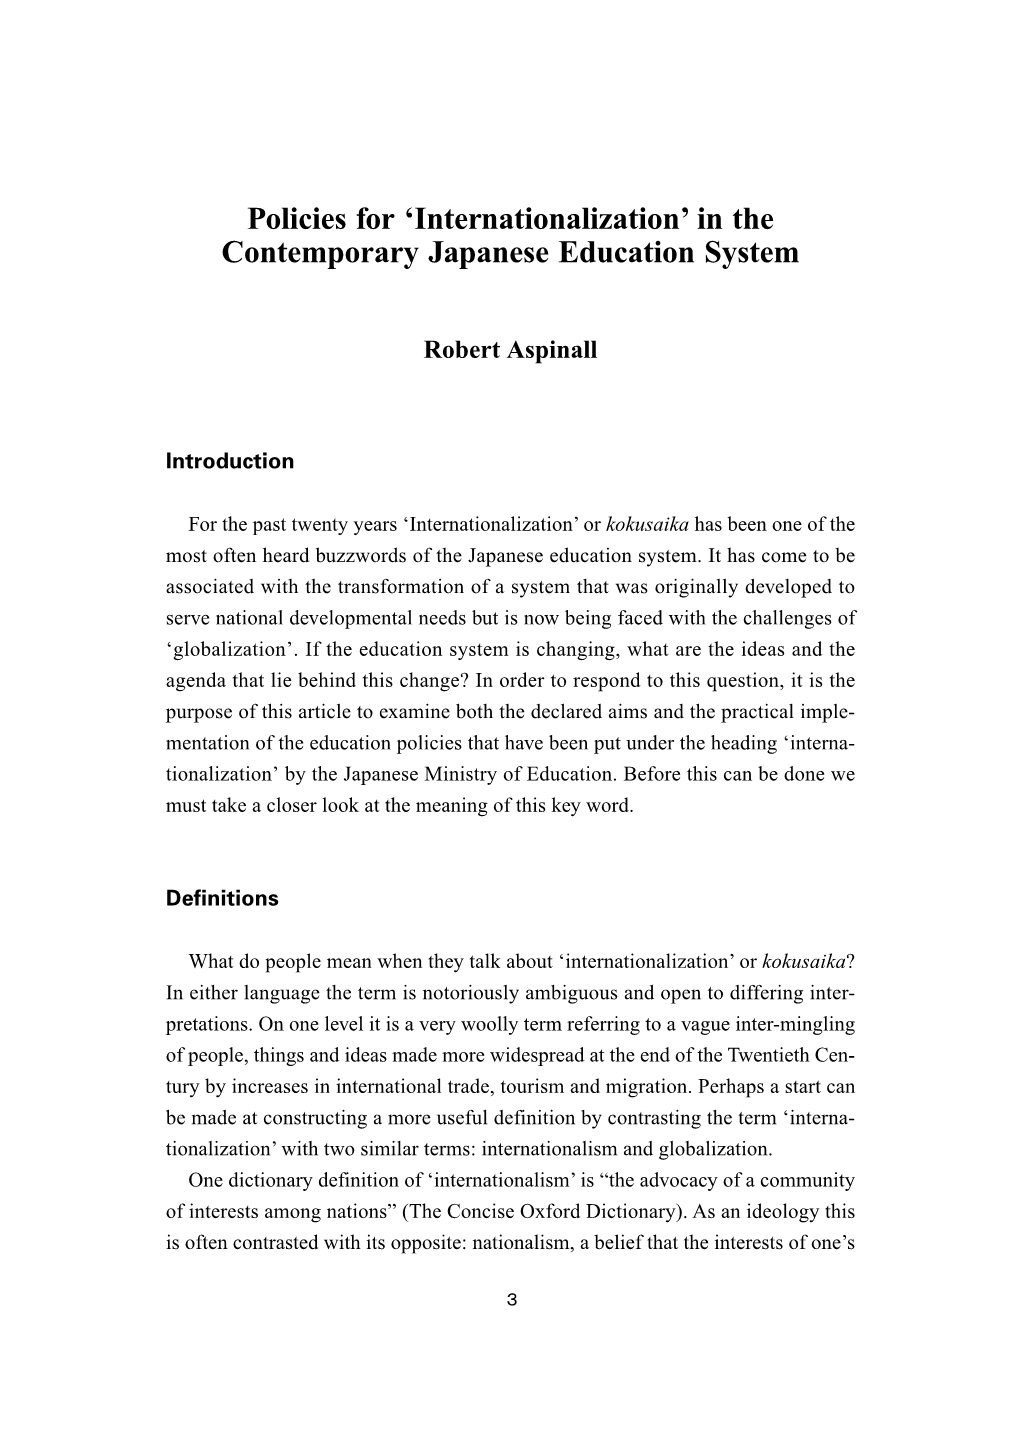 Policies for 'Internationalization' in the Contemporary Japanese Education System